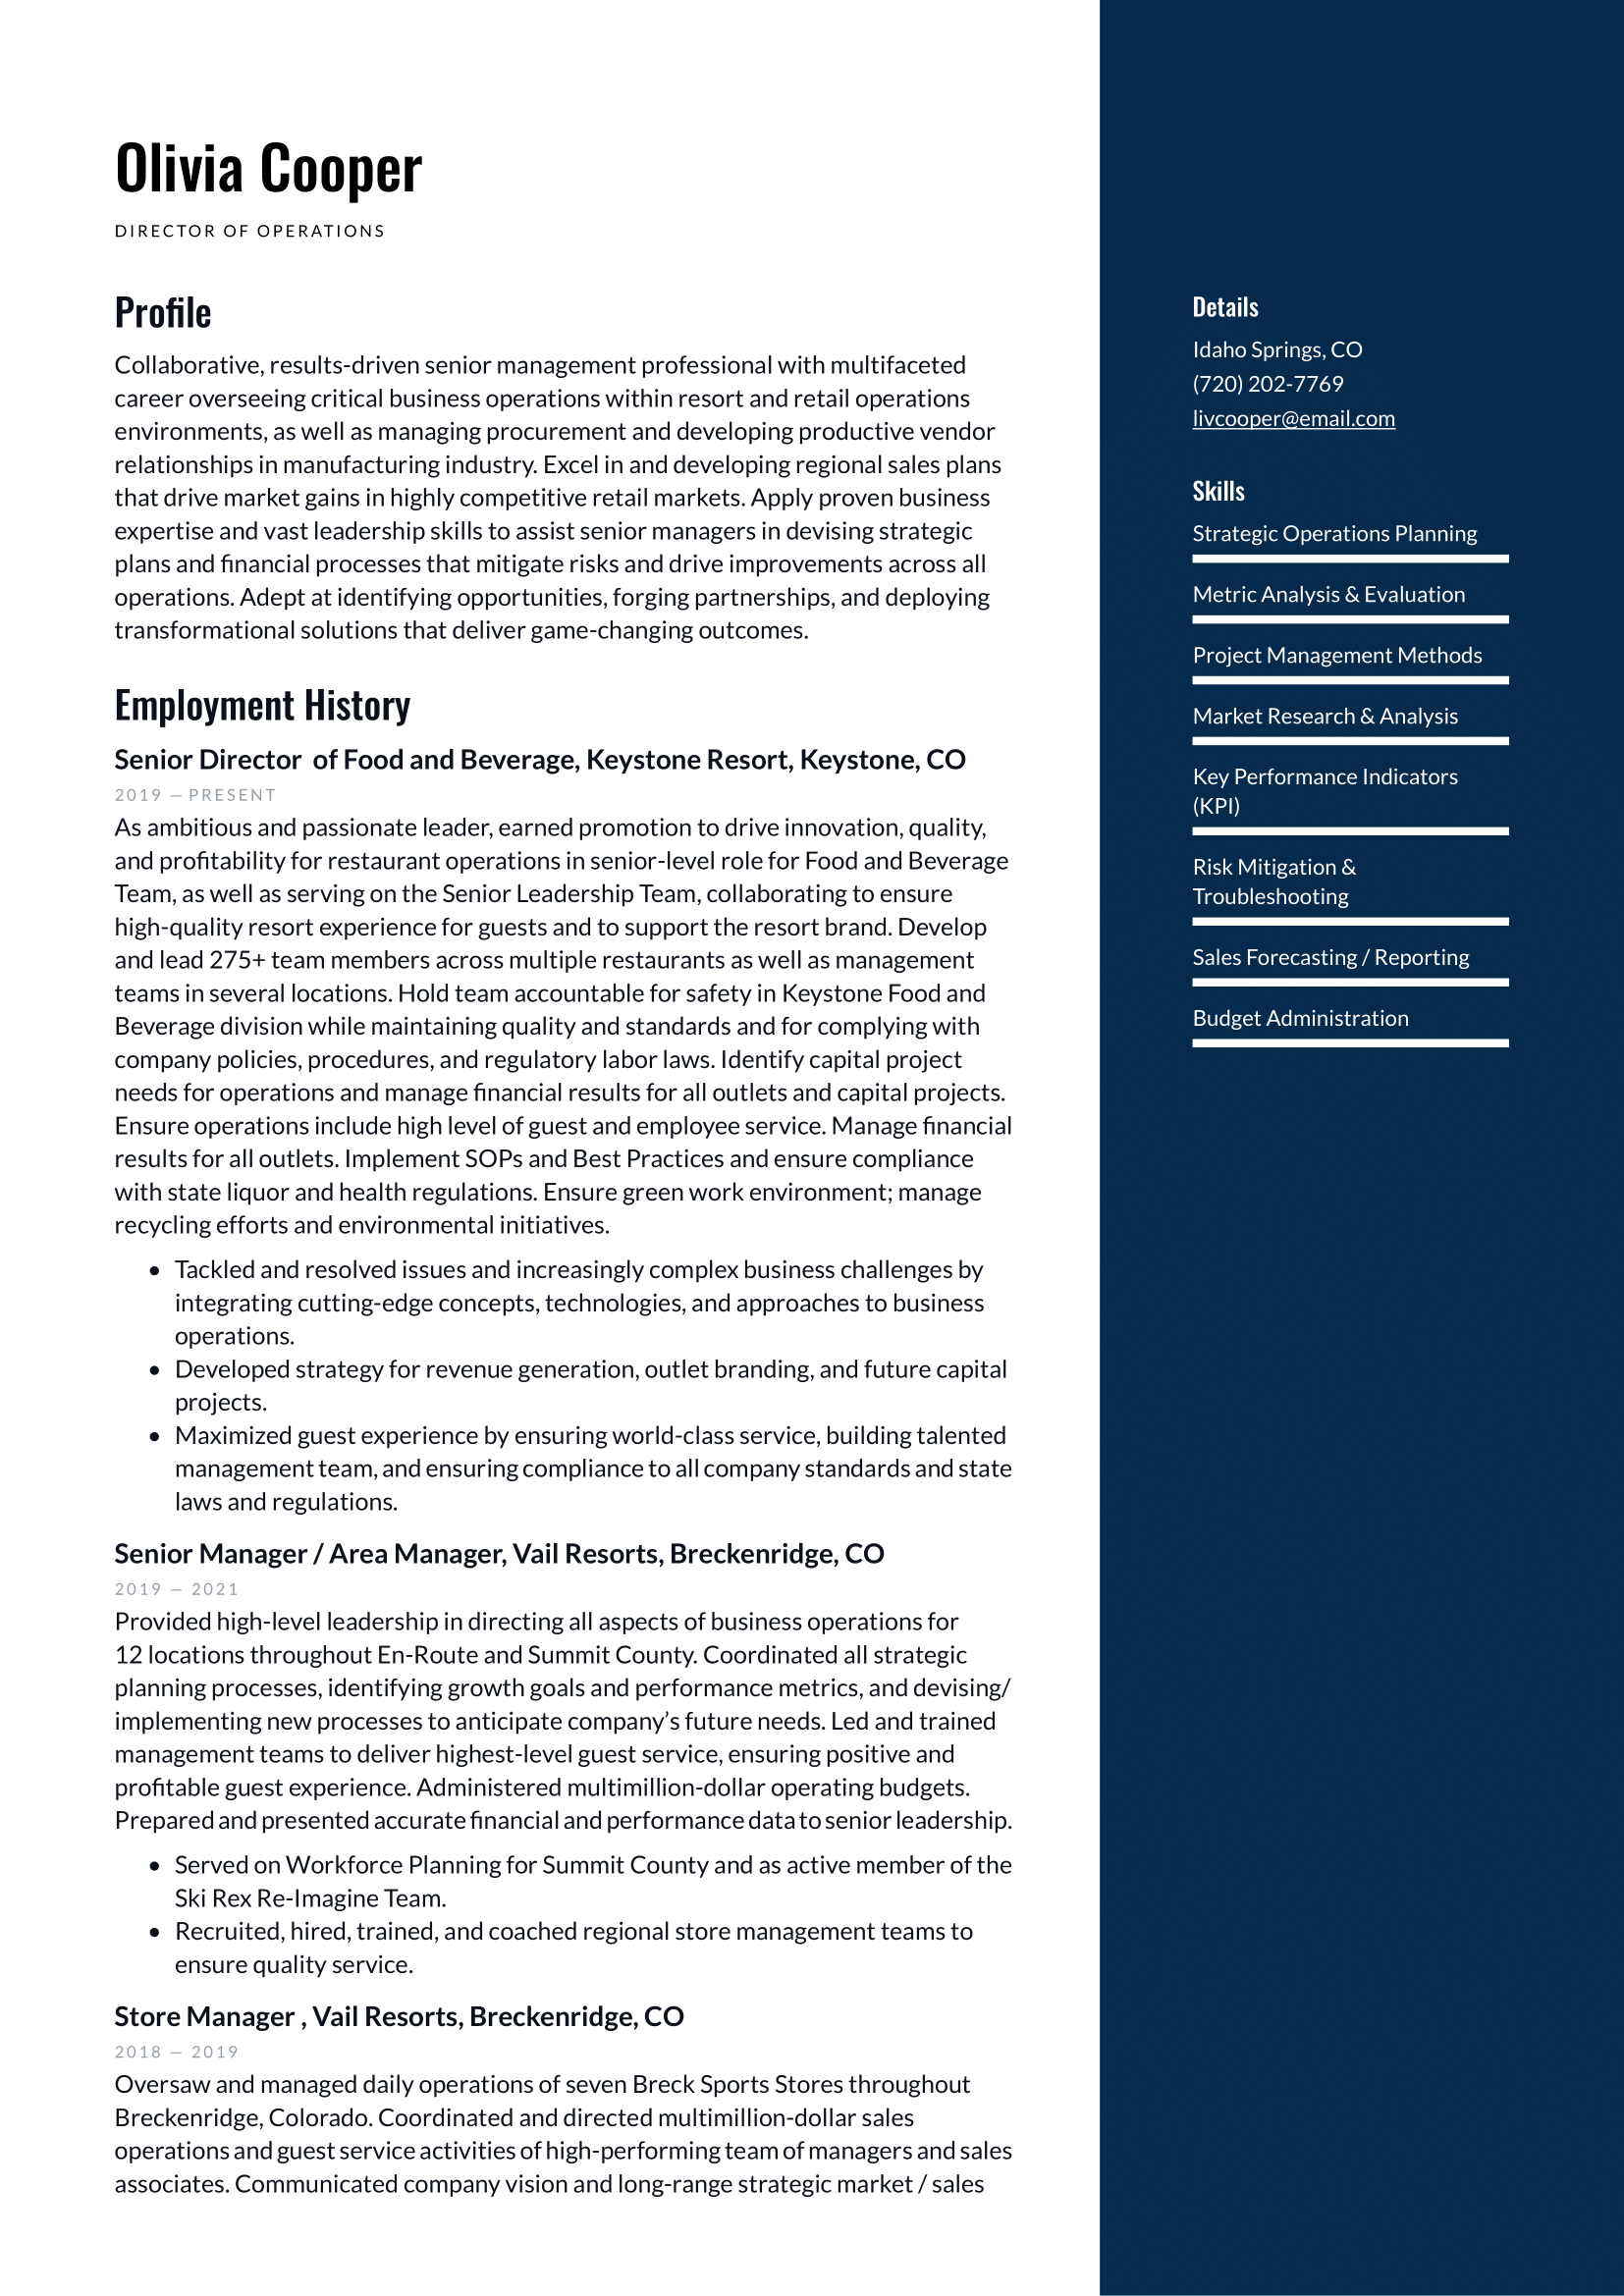 Director of Operations Resume Example & Writing Guide